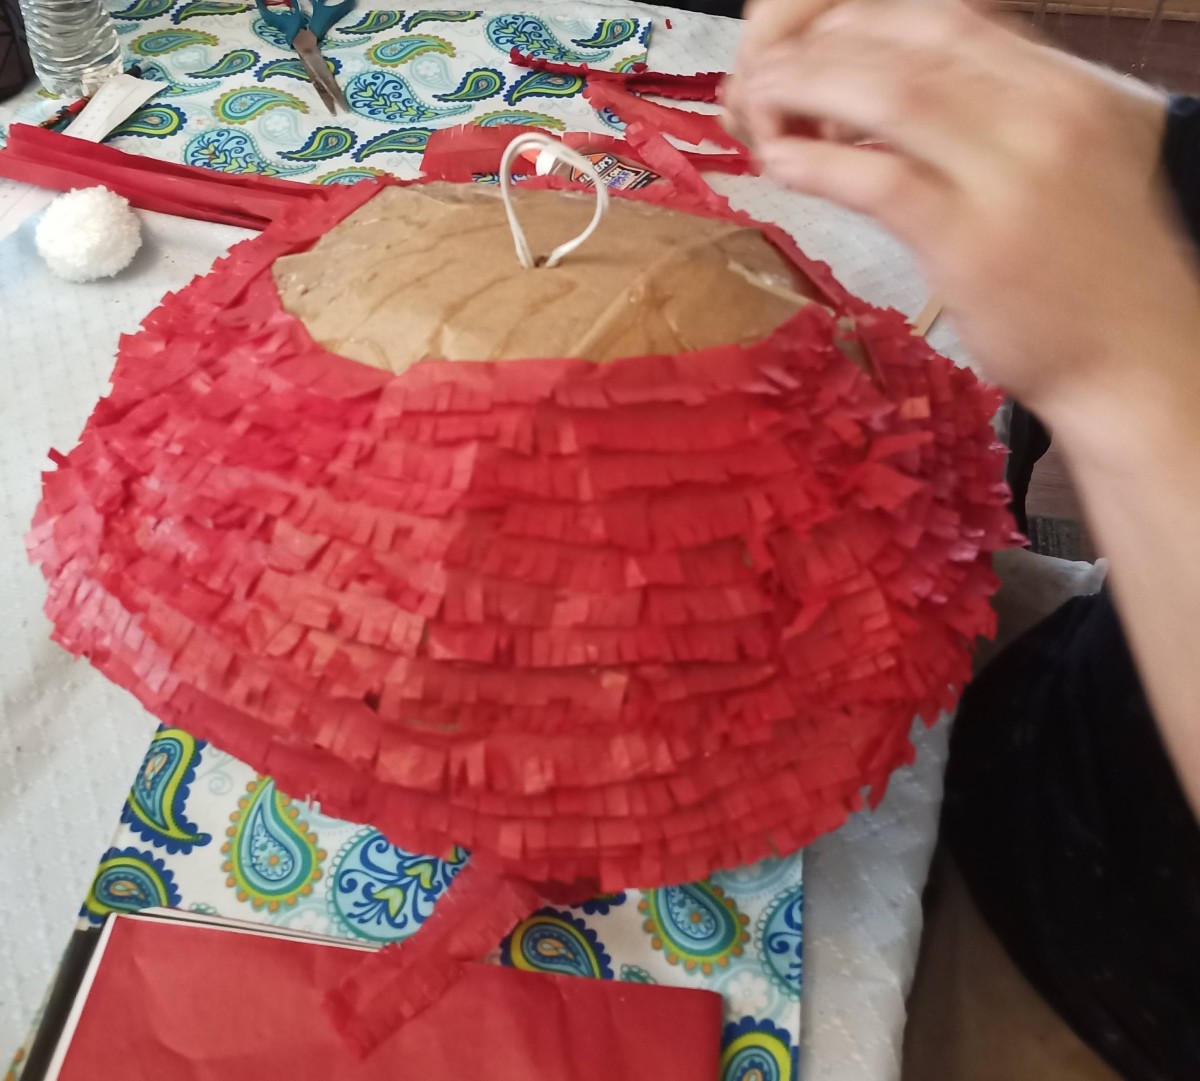 wrap your cut strands of tissue paper around your cardboard body. Make sure you're layering your strips and gluing one piece all the way around the body to prevent gaps in your final product.